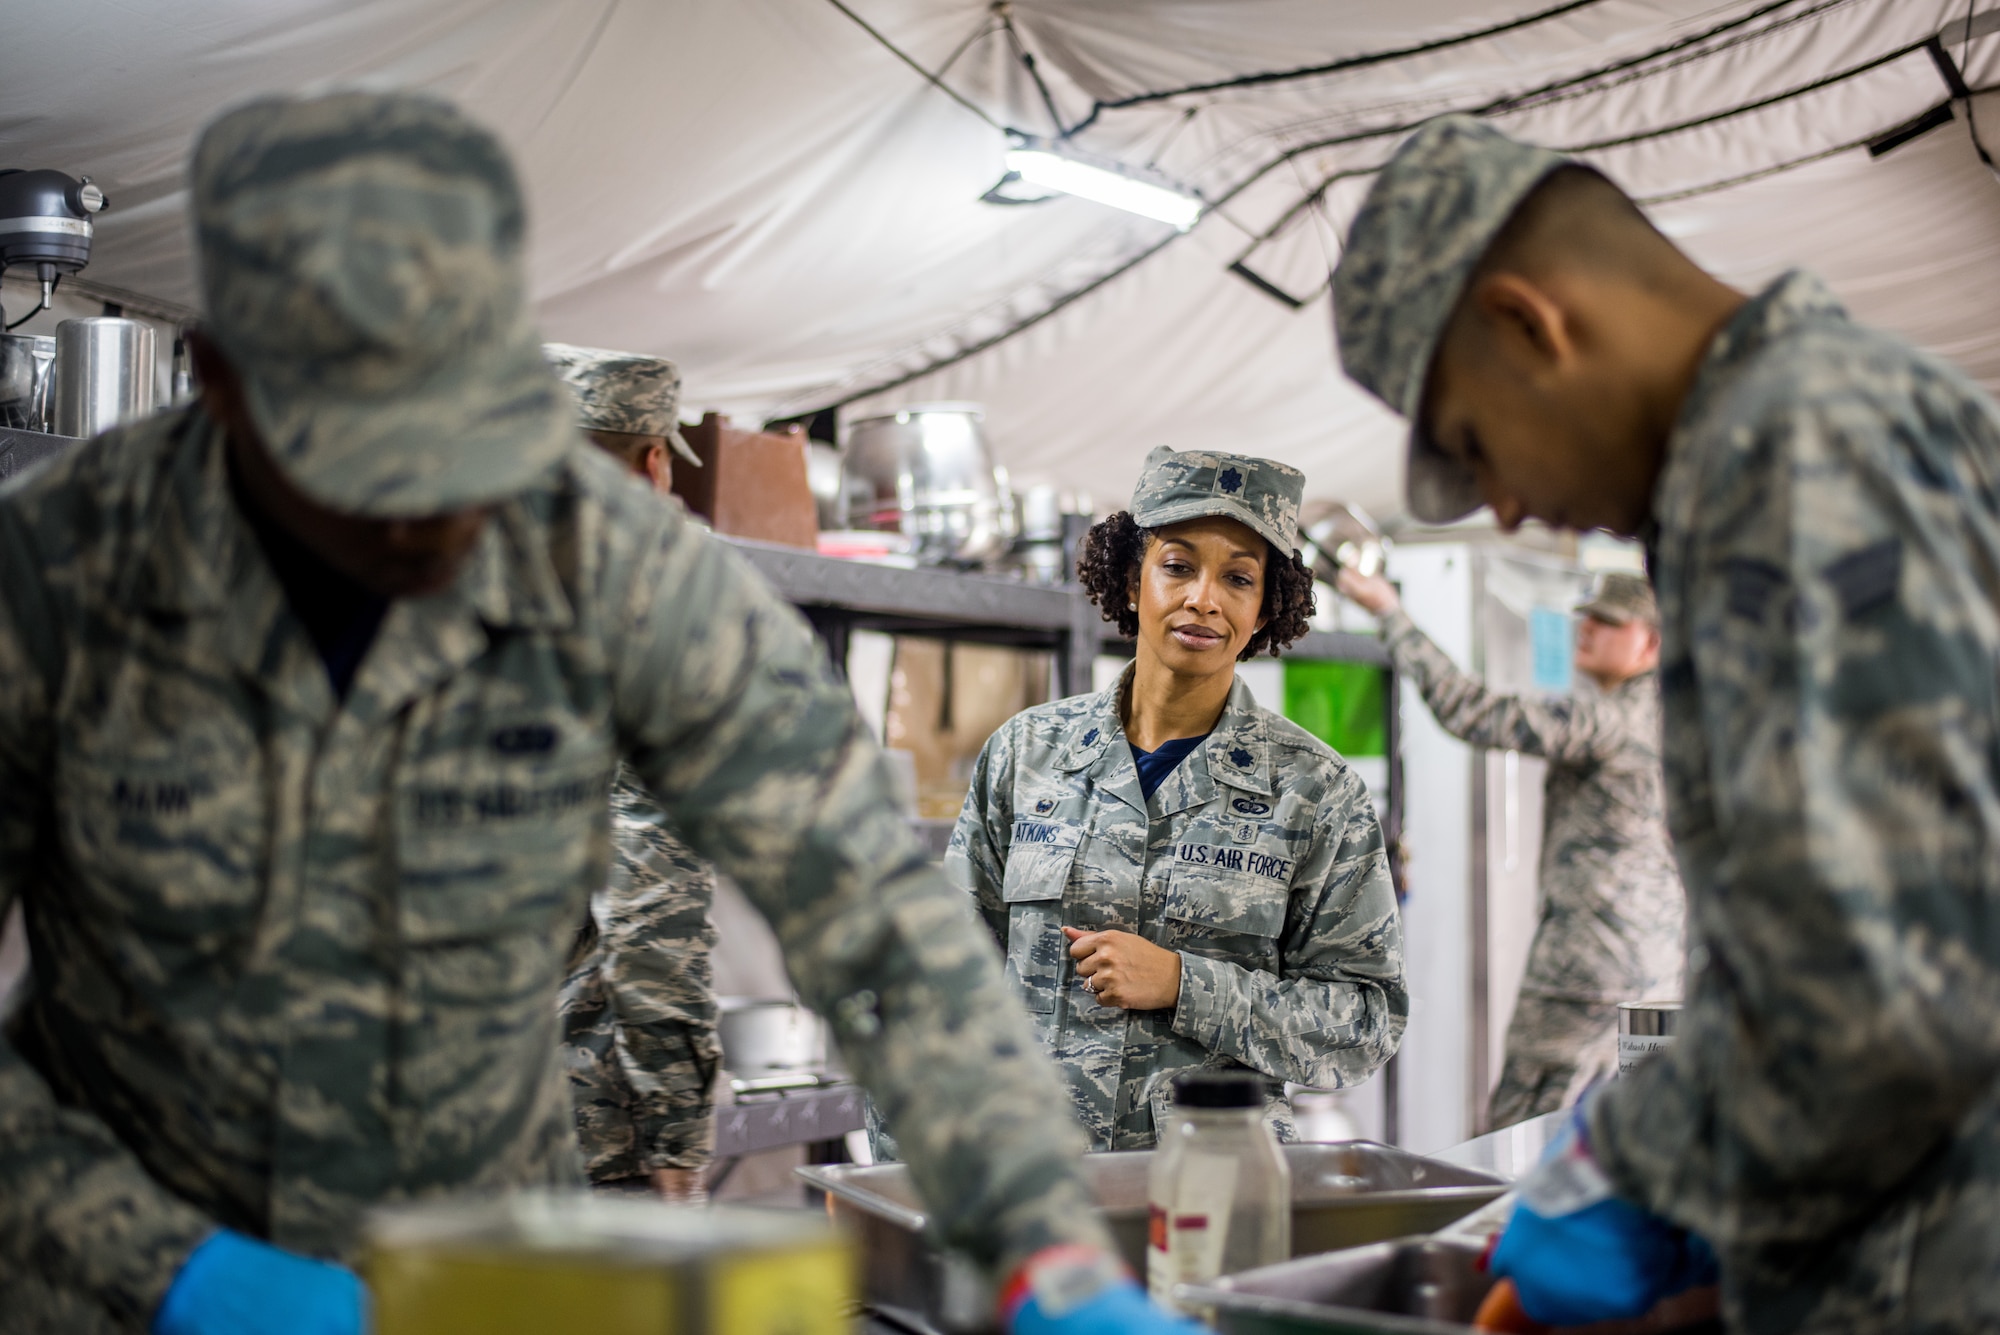 Lt. Col. Joy Atkins, 512th Memorial Affairs Squadron commander, observes the 512th MAS cooking team as they prepare food during the John L. Hennessy food service competition at Dobbins Air Reserve Base, Georgia, March 9, 2019. The 512th MAS cooking team were tasked with serving an appetizer, three entrées and dessert as a part of the competition rules. (U.S. Air Force photo by Staff Sgt. Damien Taylor)